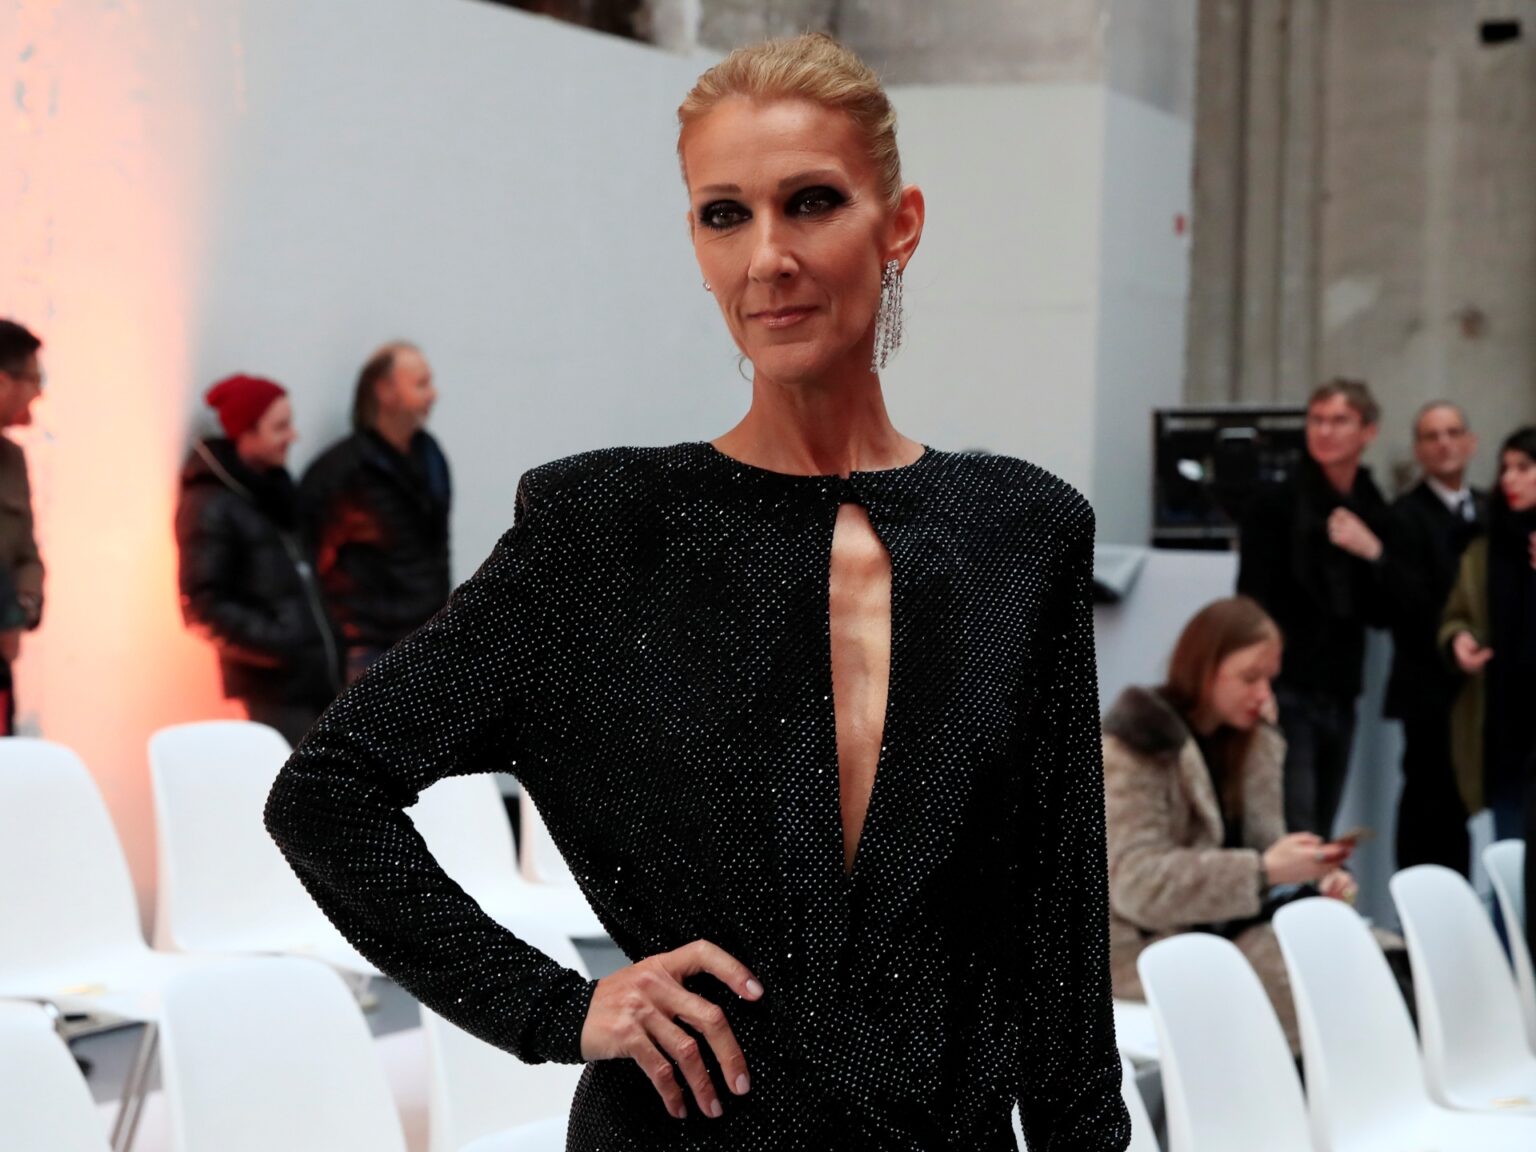 Celine Dion cancels 2023-24 shows due to health